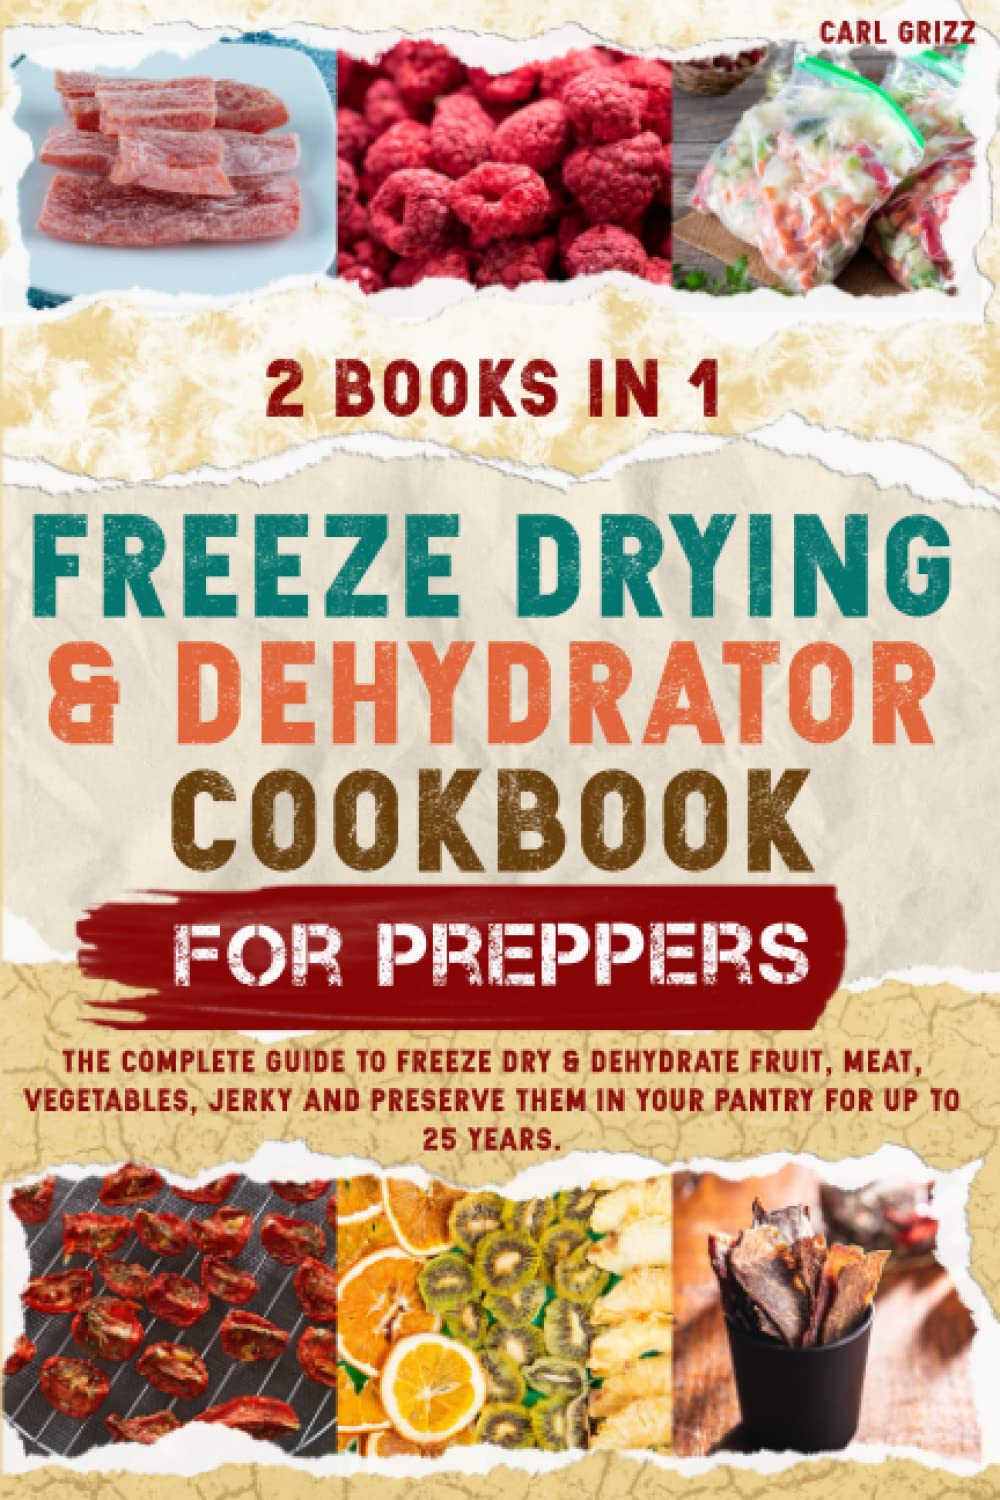 FREEZE DRYING & DEHYDRATOR COOKBOOK FOR PREPPERS: 2 BOOKS IN 1 | The Complete Guide To Freeze Dry & Dehydrate Fruit, Meat, Vegetables, Jerky And Preserve Them In Your Pantry For Up To 25 Years.